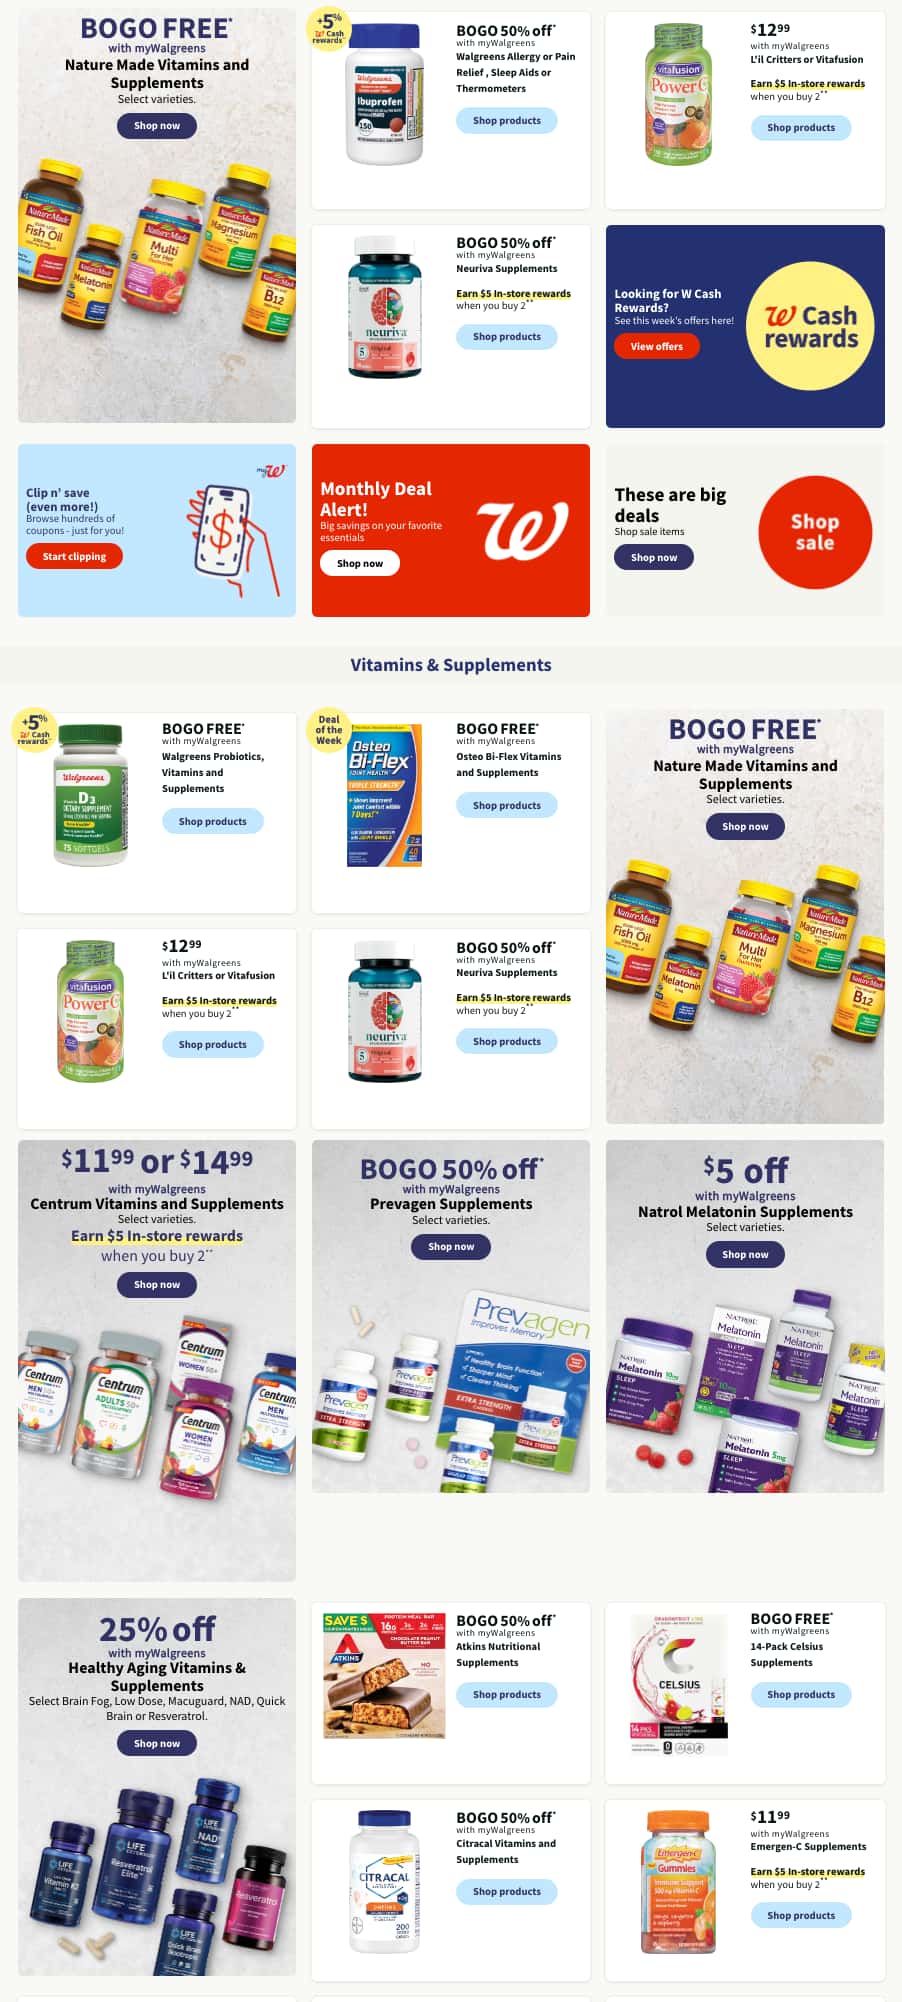 Walgreens Weekly Ad Preview for October 1 - 7, 2023